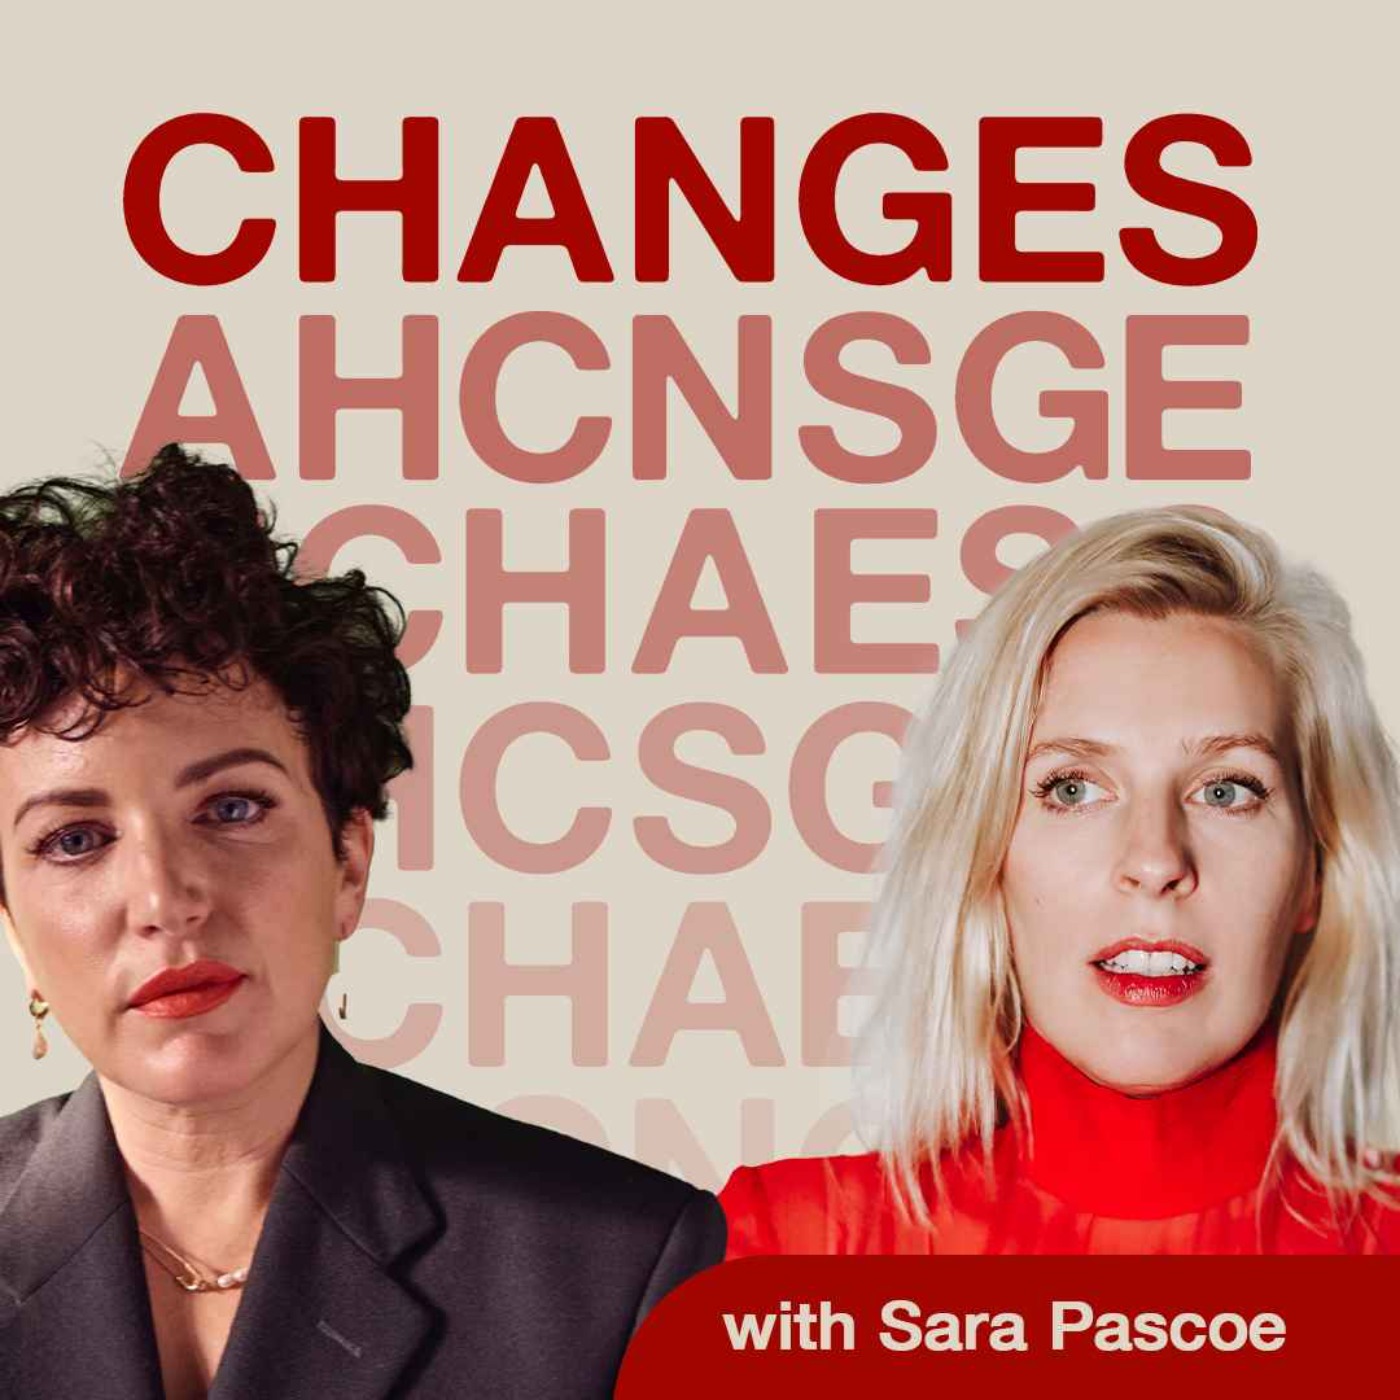 Sara Pascoe on self worth, detachment and reflecting on separated parents